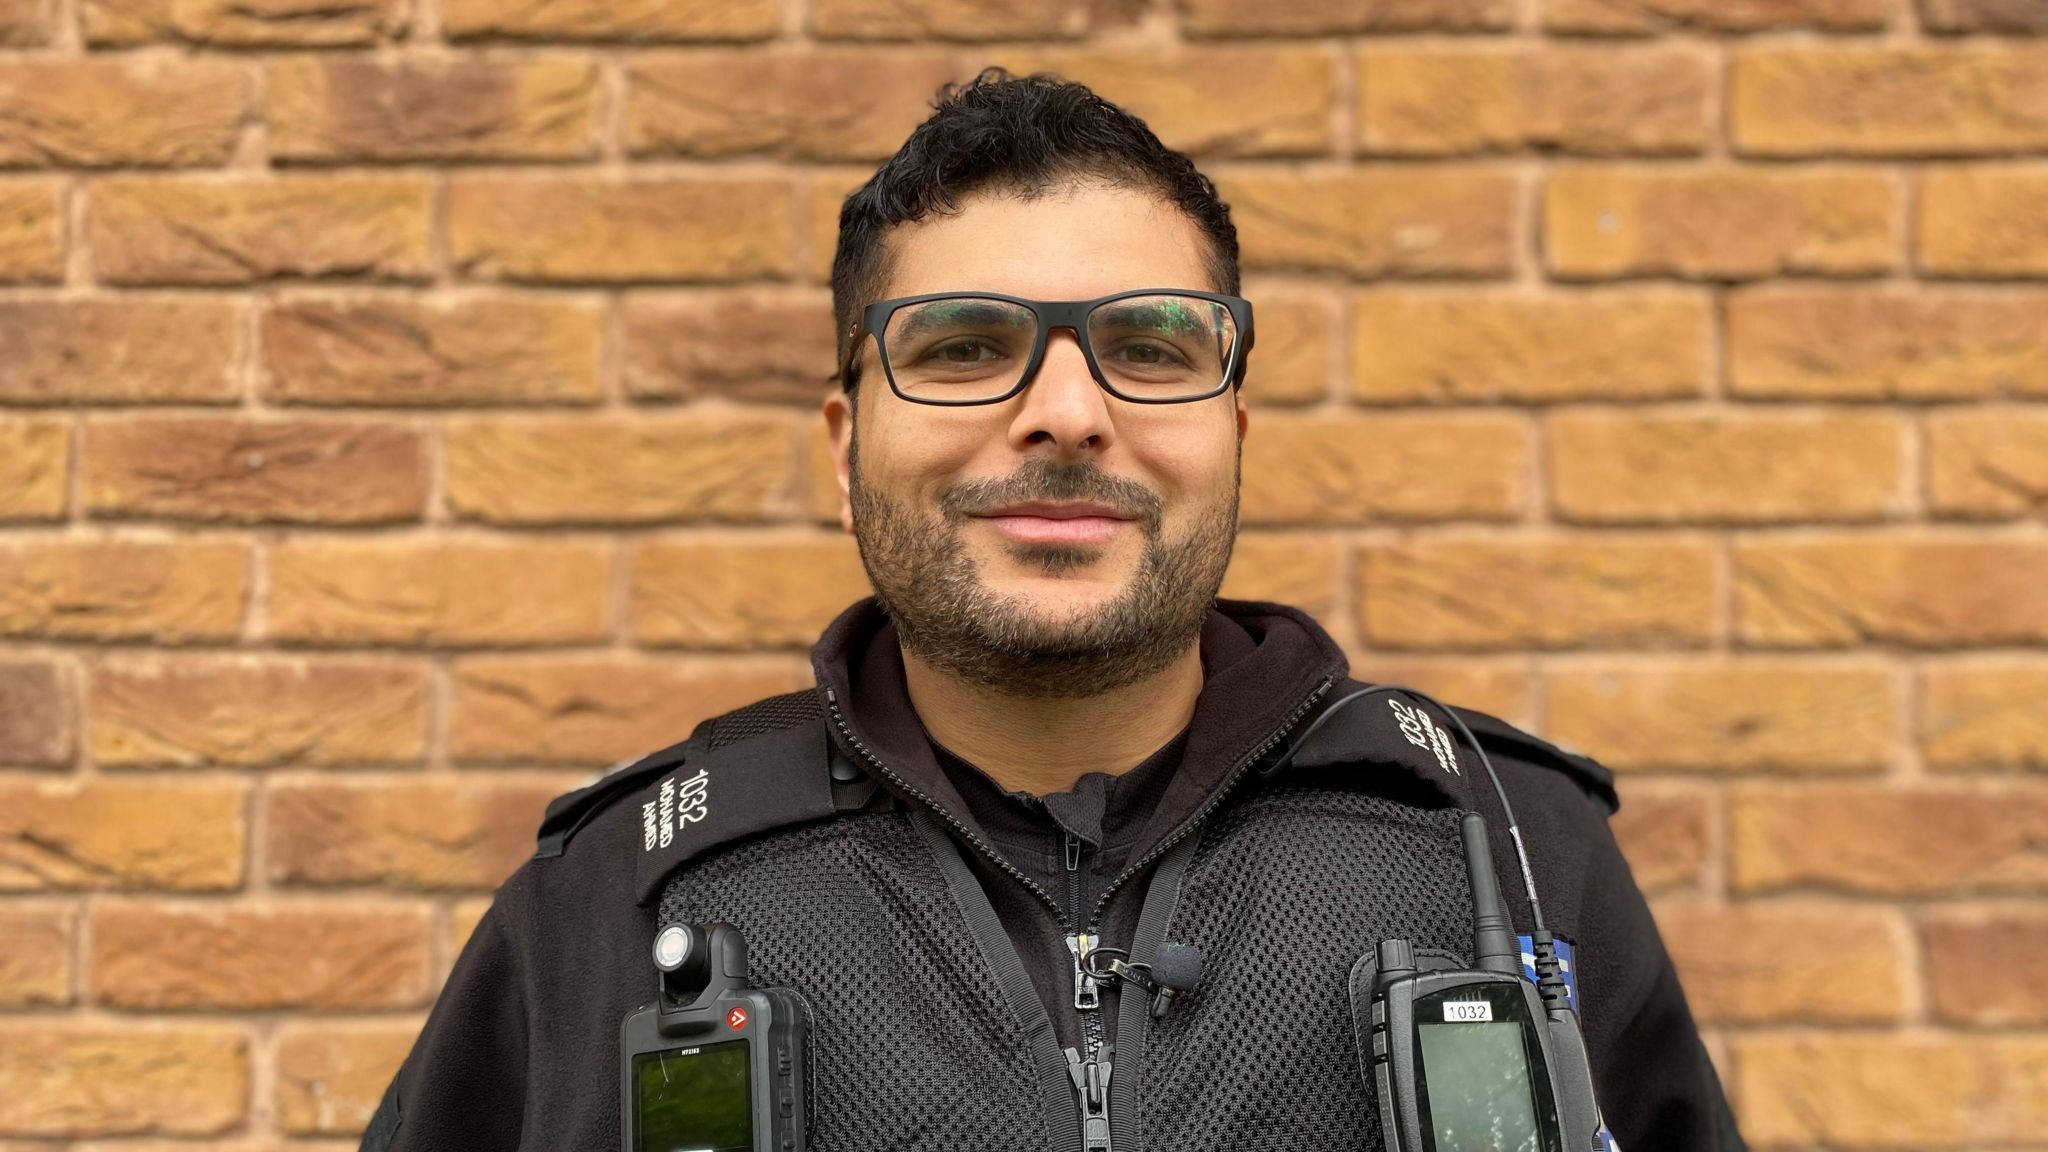 PC Mohammed Ahmed